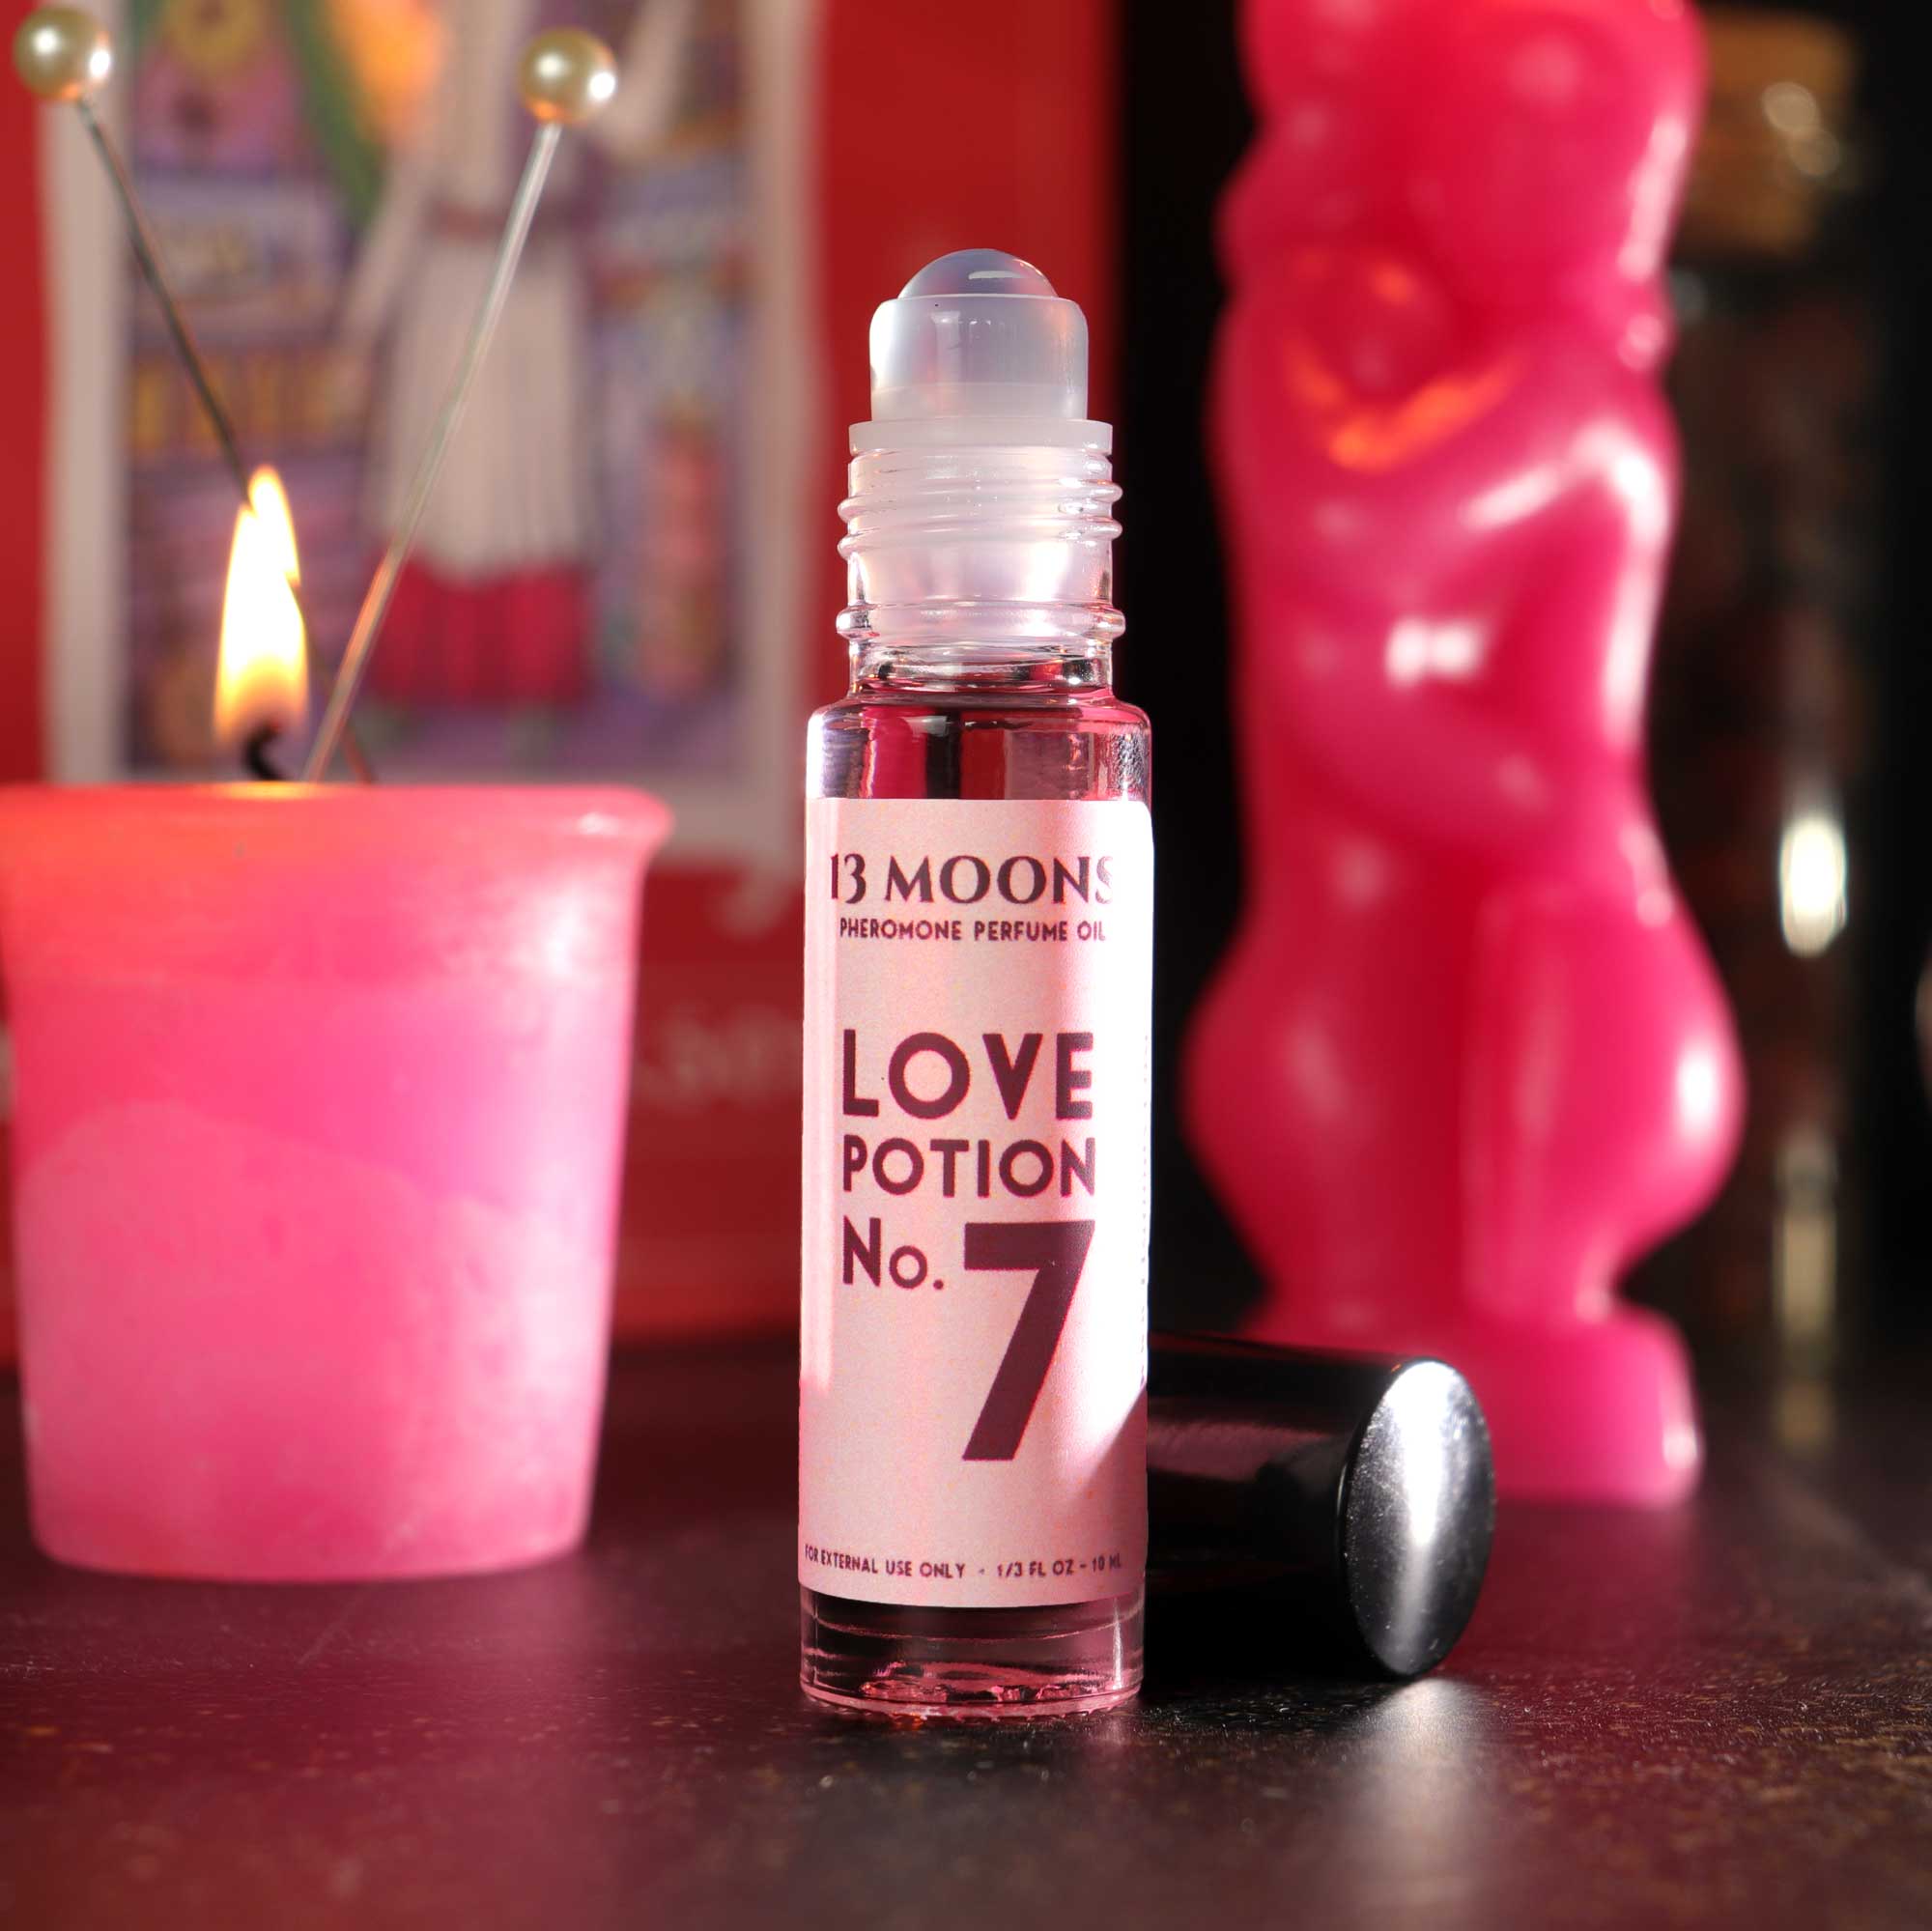 Handcrafted Love Potion Number 7 Pheromone